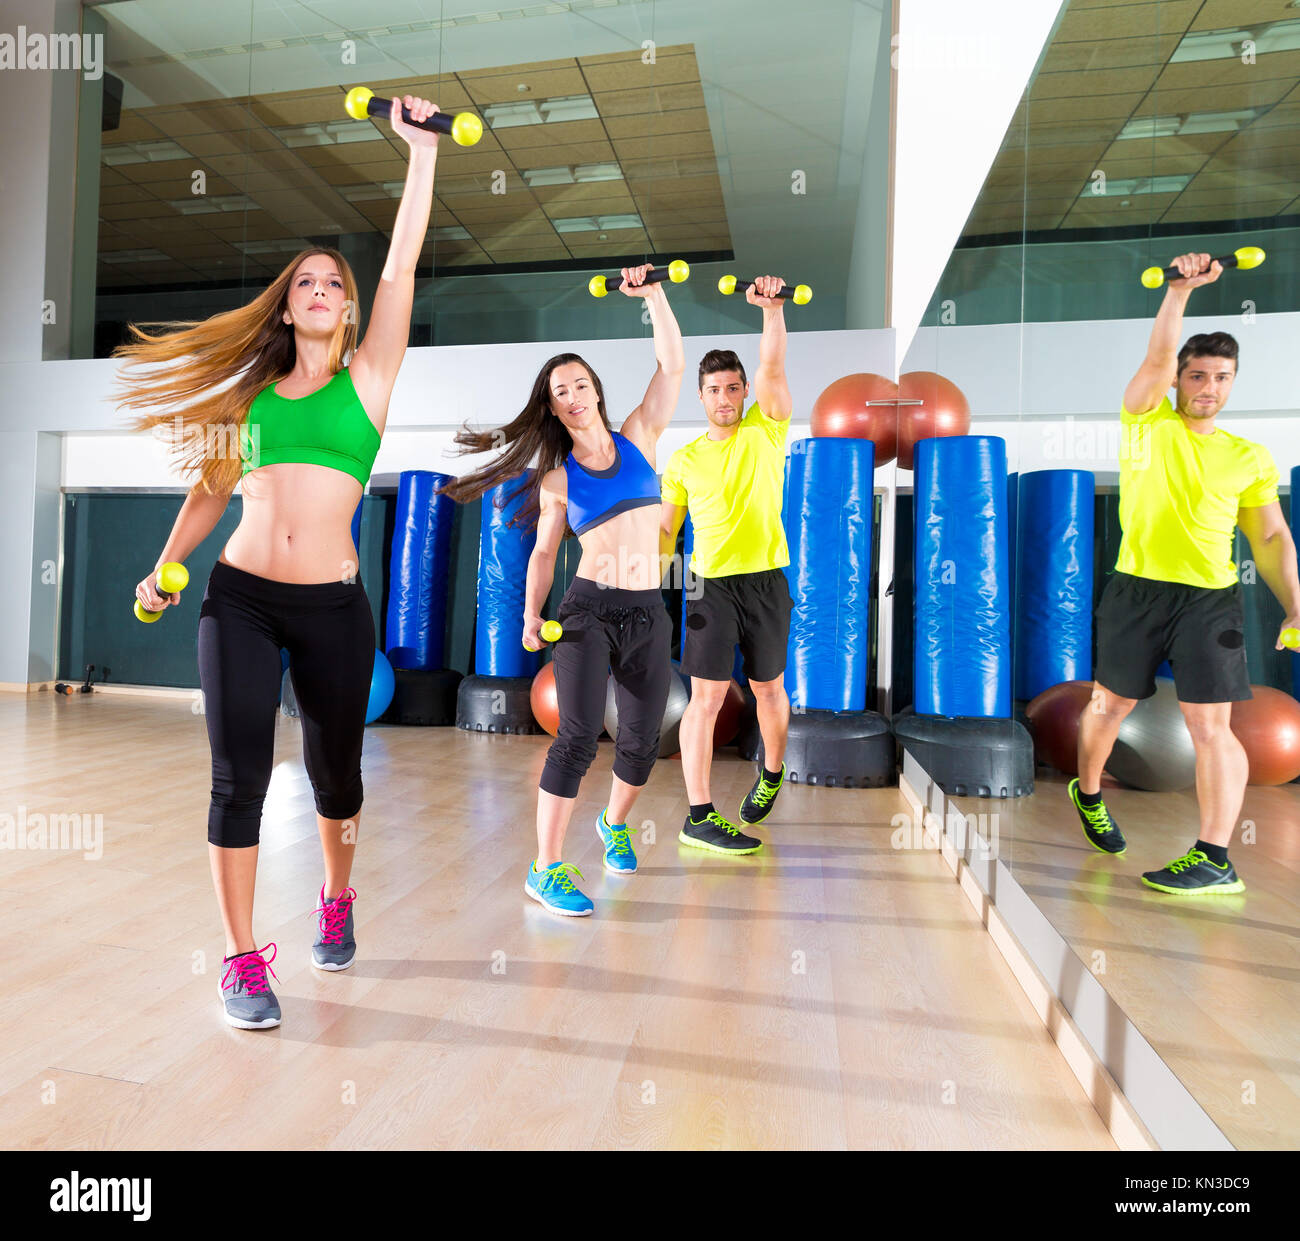 zumba dance cardio people group training at fitness gym workout exercise  Stock Photo - Alamy